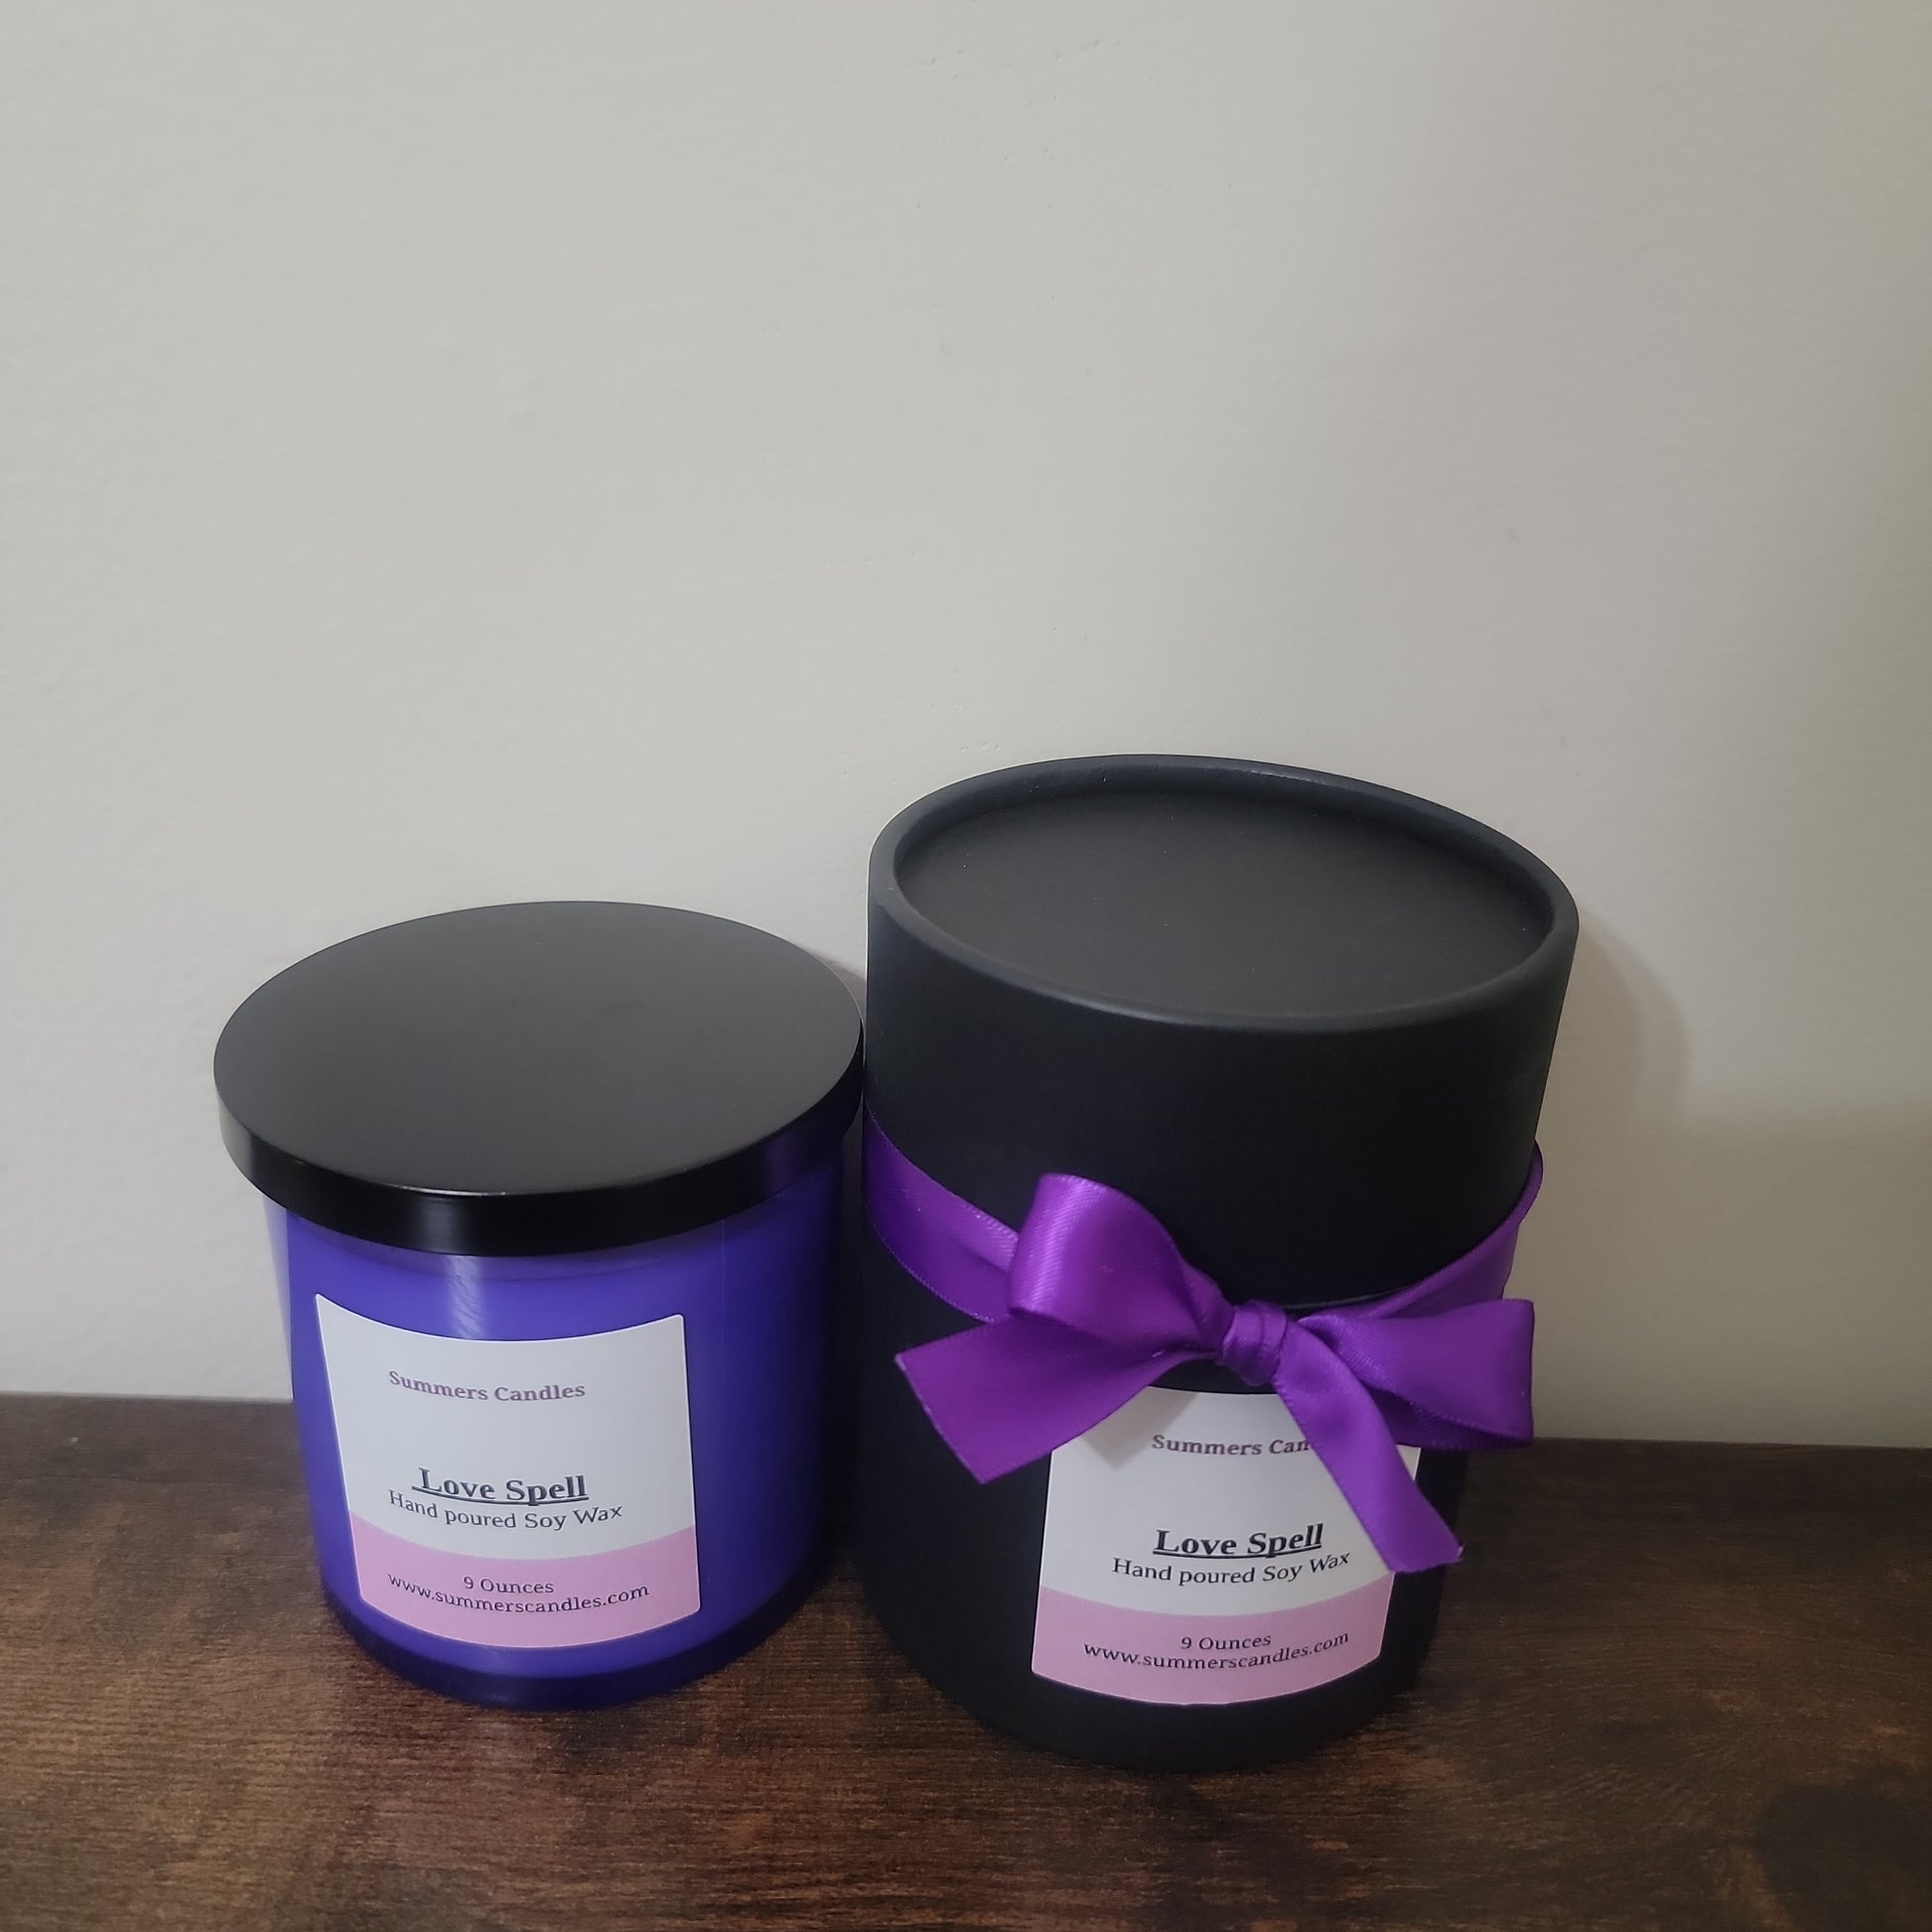 Love Spell Scented Candles - Summers Candles